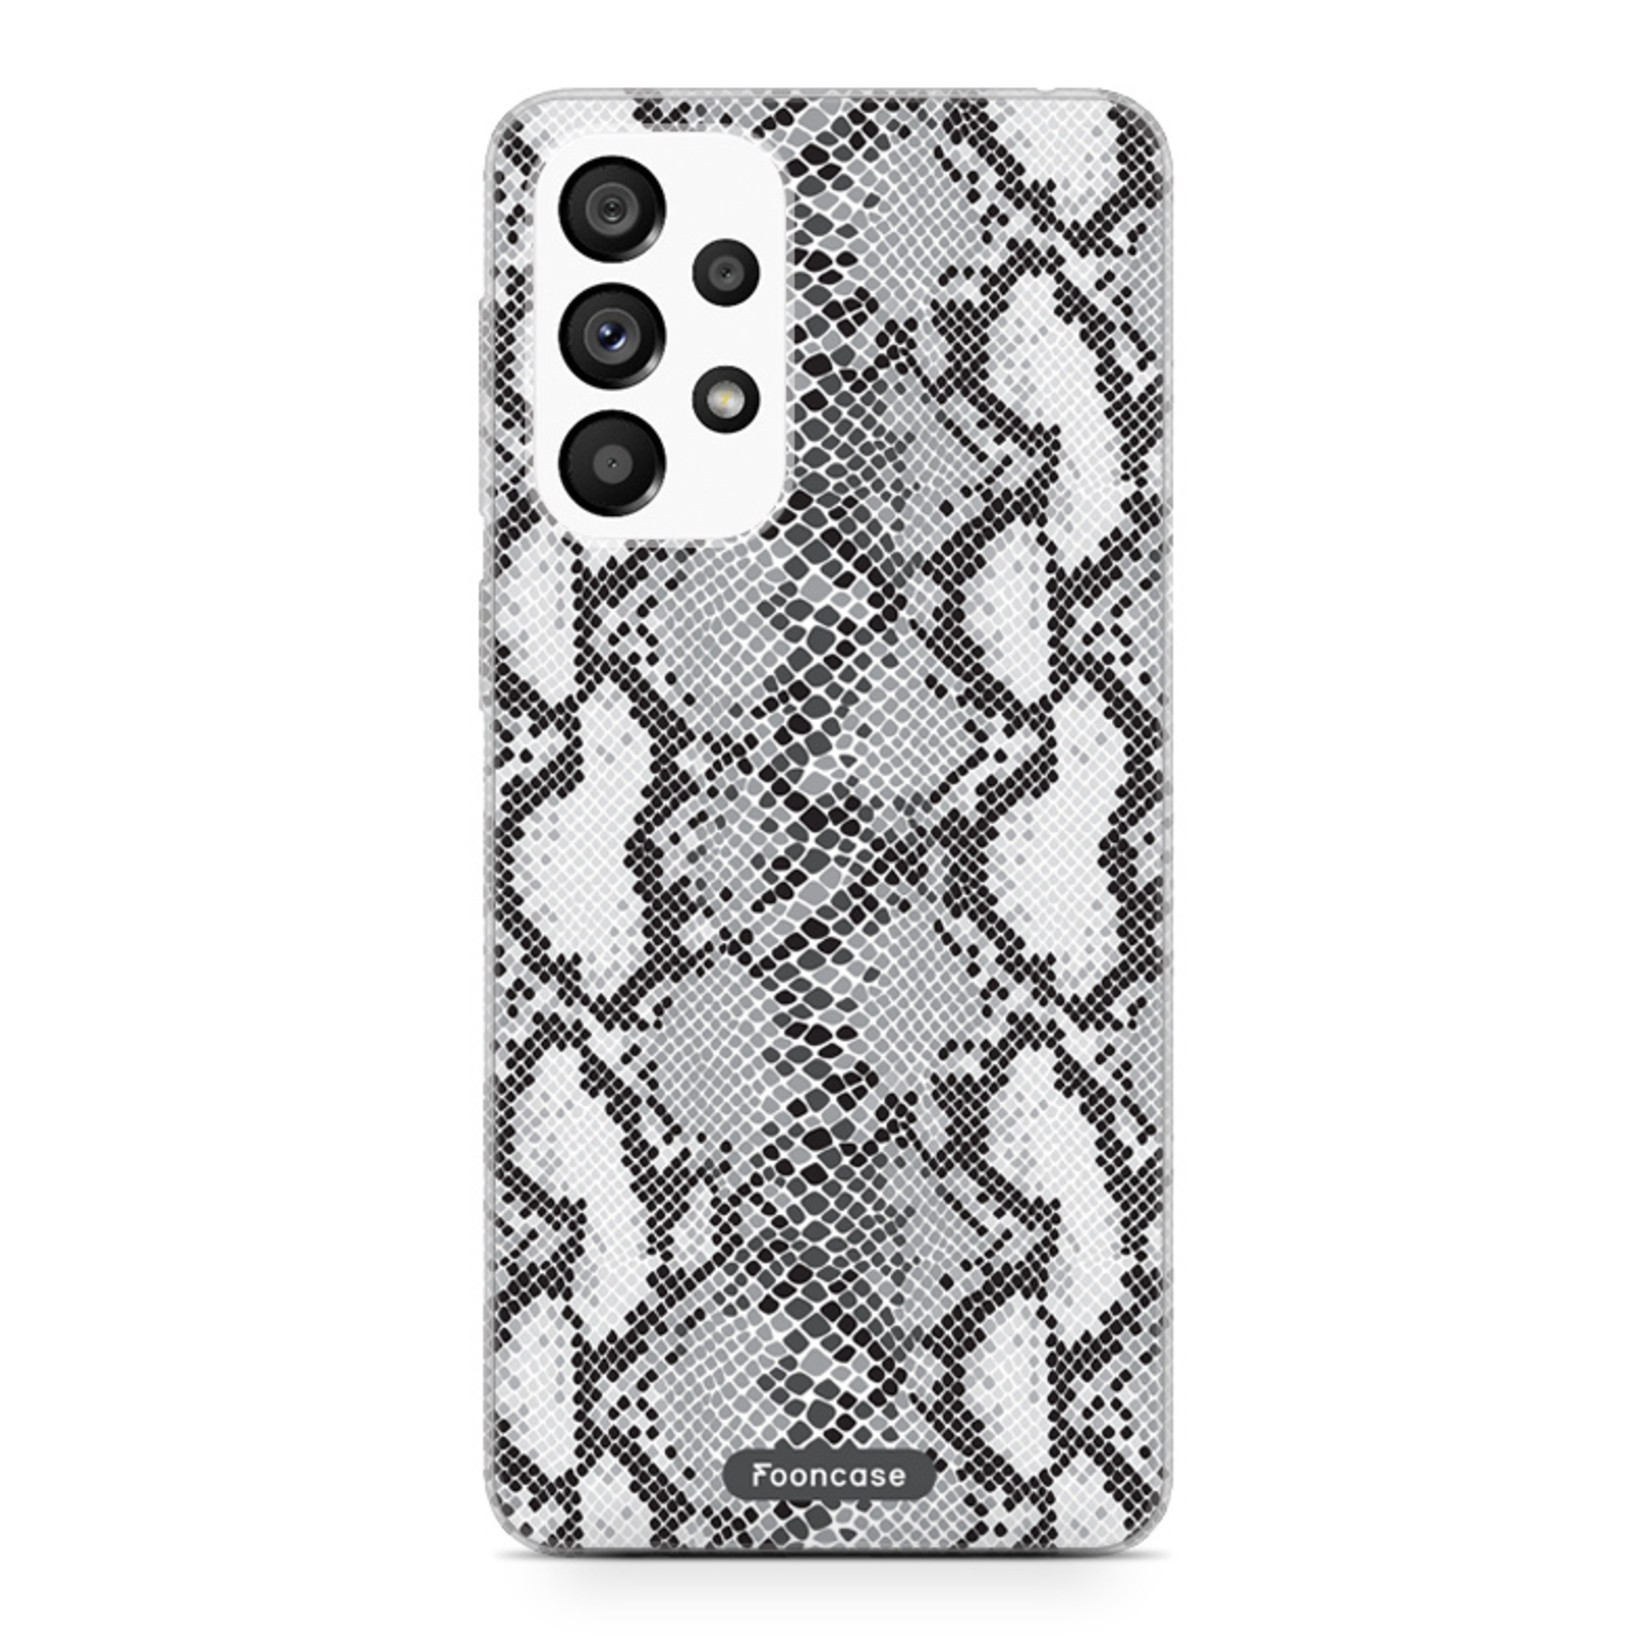 Samsung Galaxy A52 Cover - Snake it!